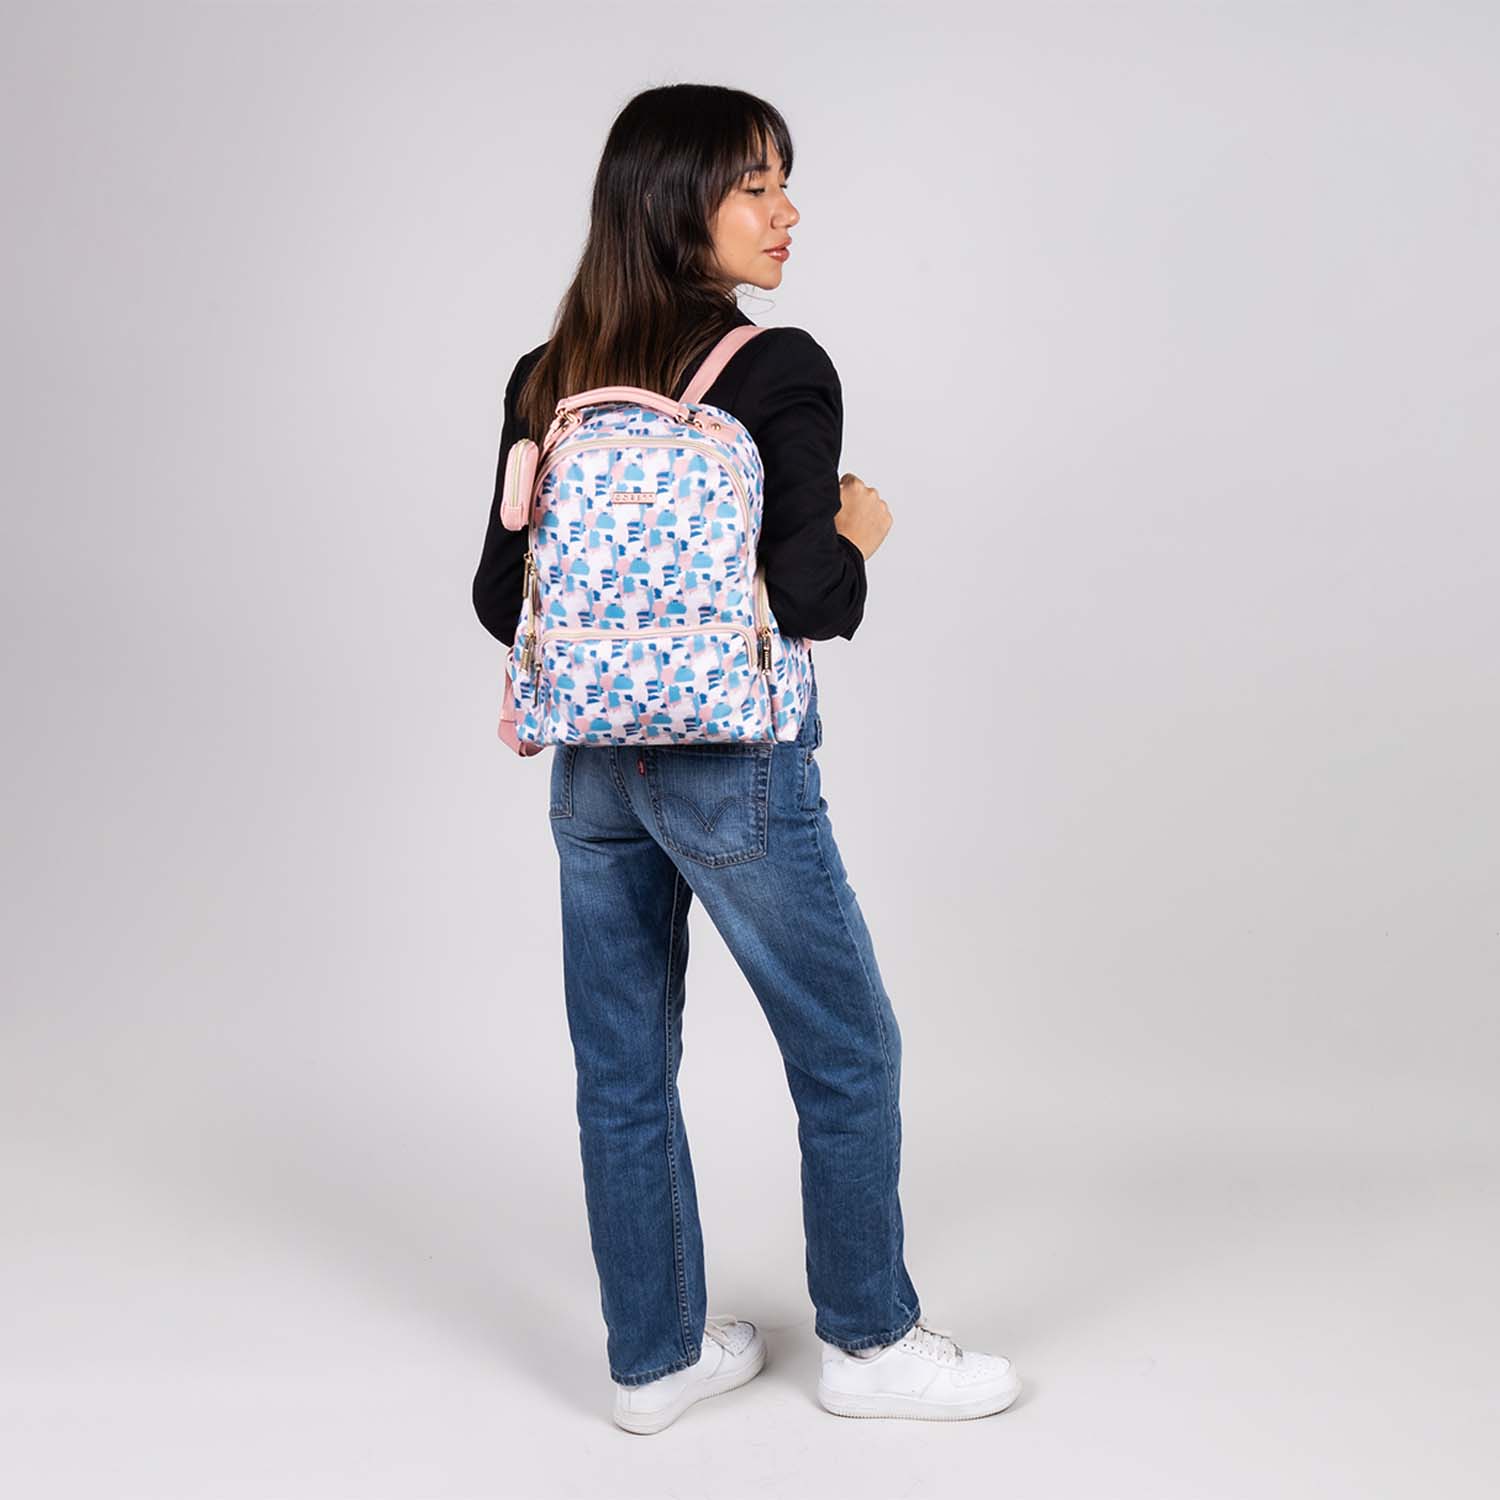 Backpack Print Rosa y Azul Sussan By Gorett